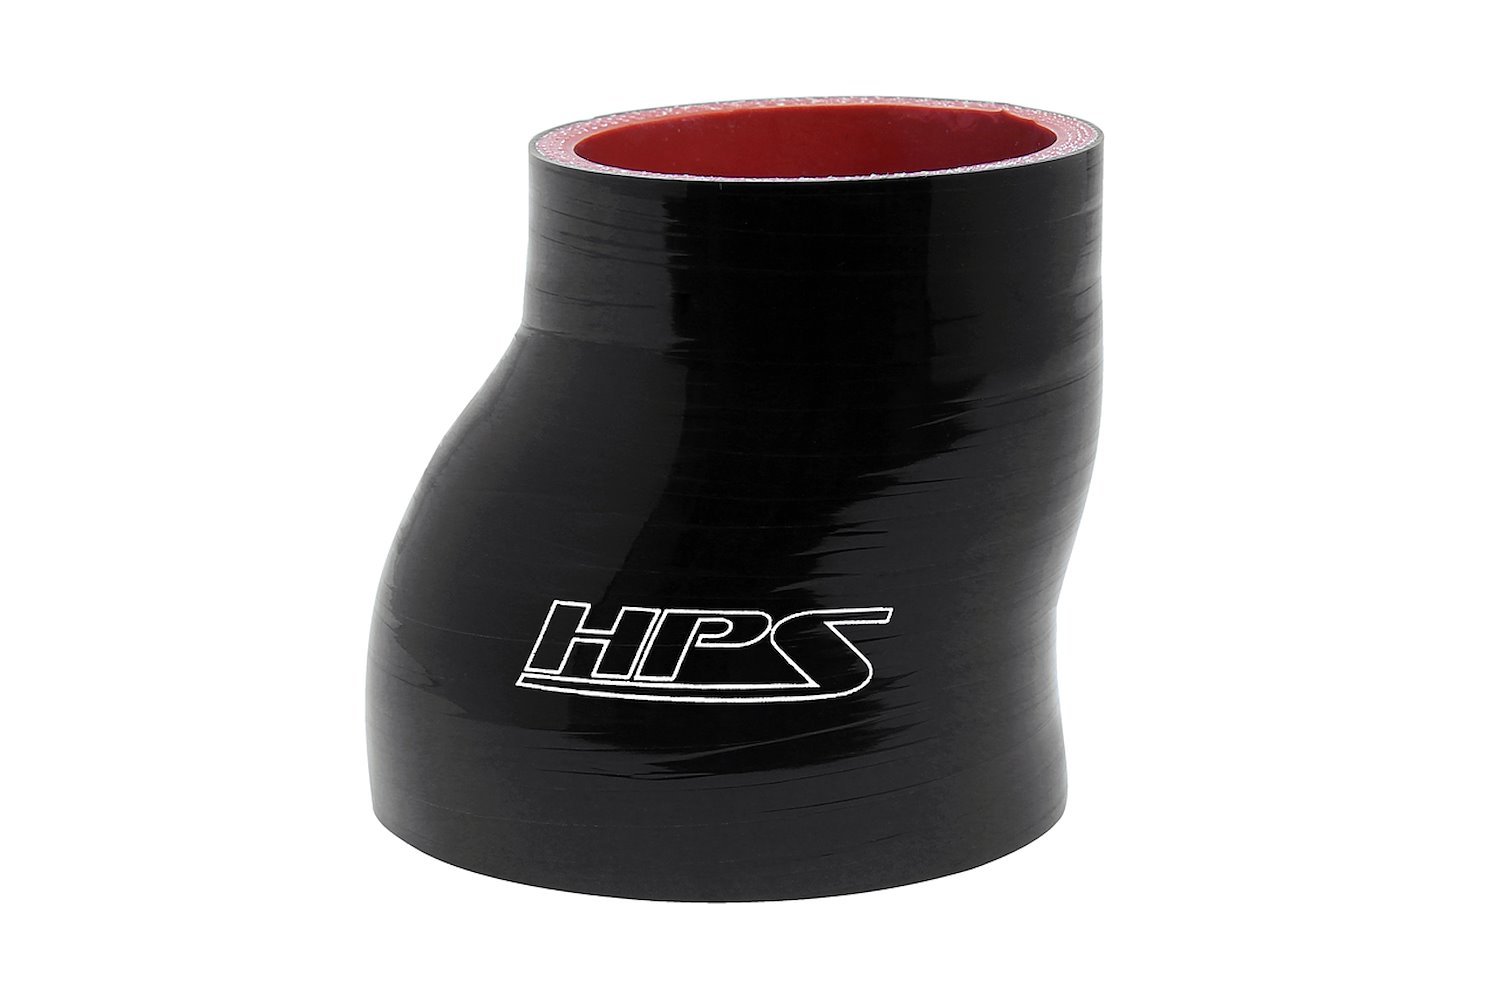 HTSOR-350-400-L4-BLK Silicone Offset Reducer Hose, High-Temp Reinforced, 3-1/2 in. - 4 in. ID, 4 in. Long, Black